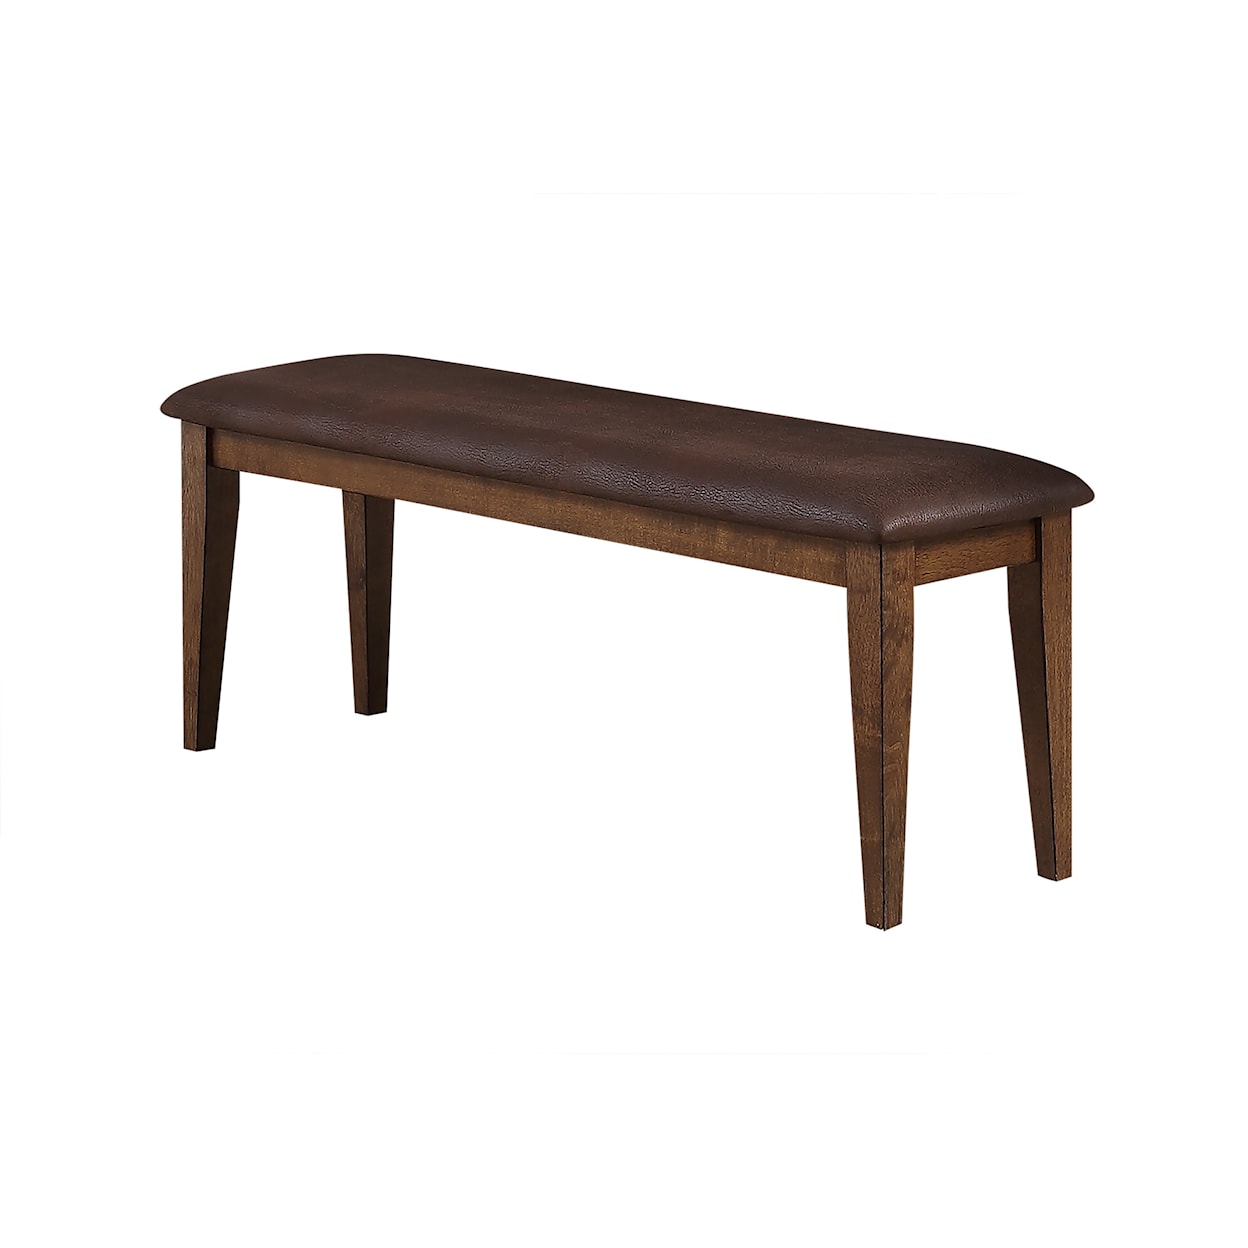 Warehouse M 1179 Dining Bench